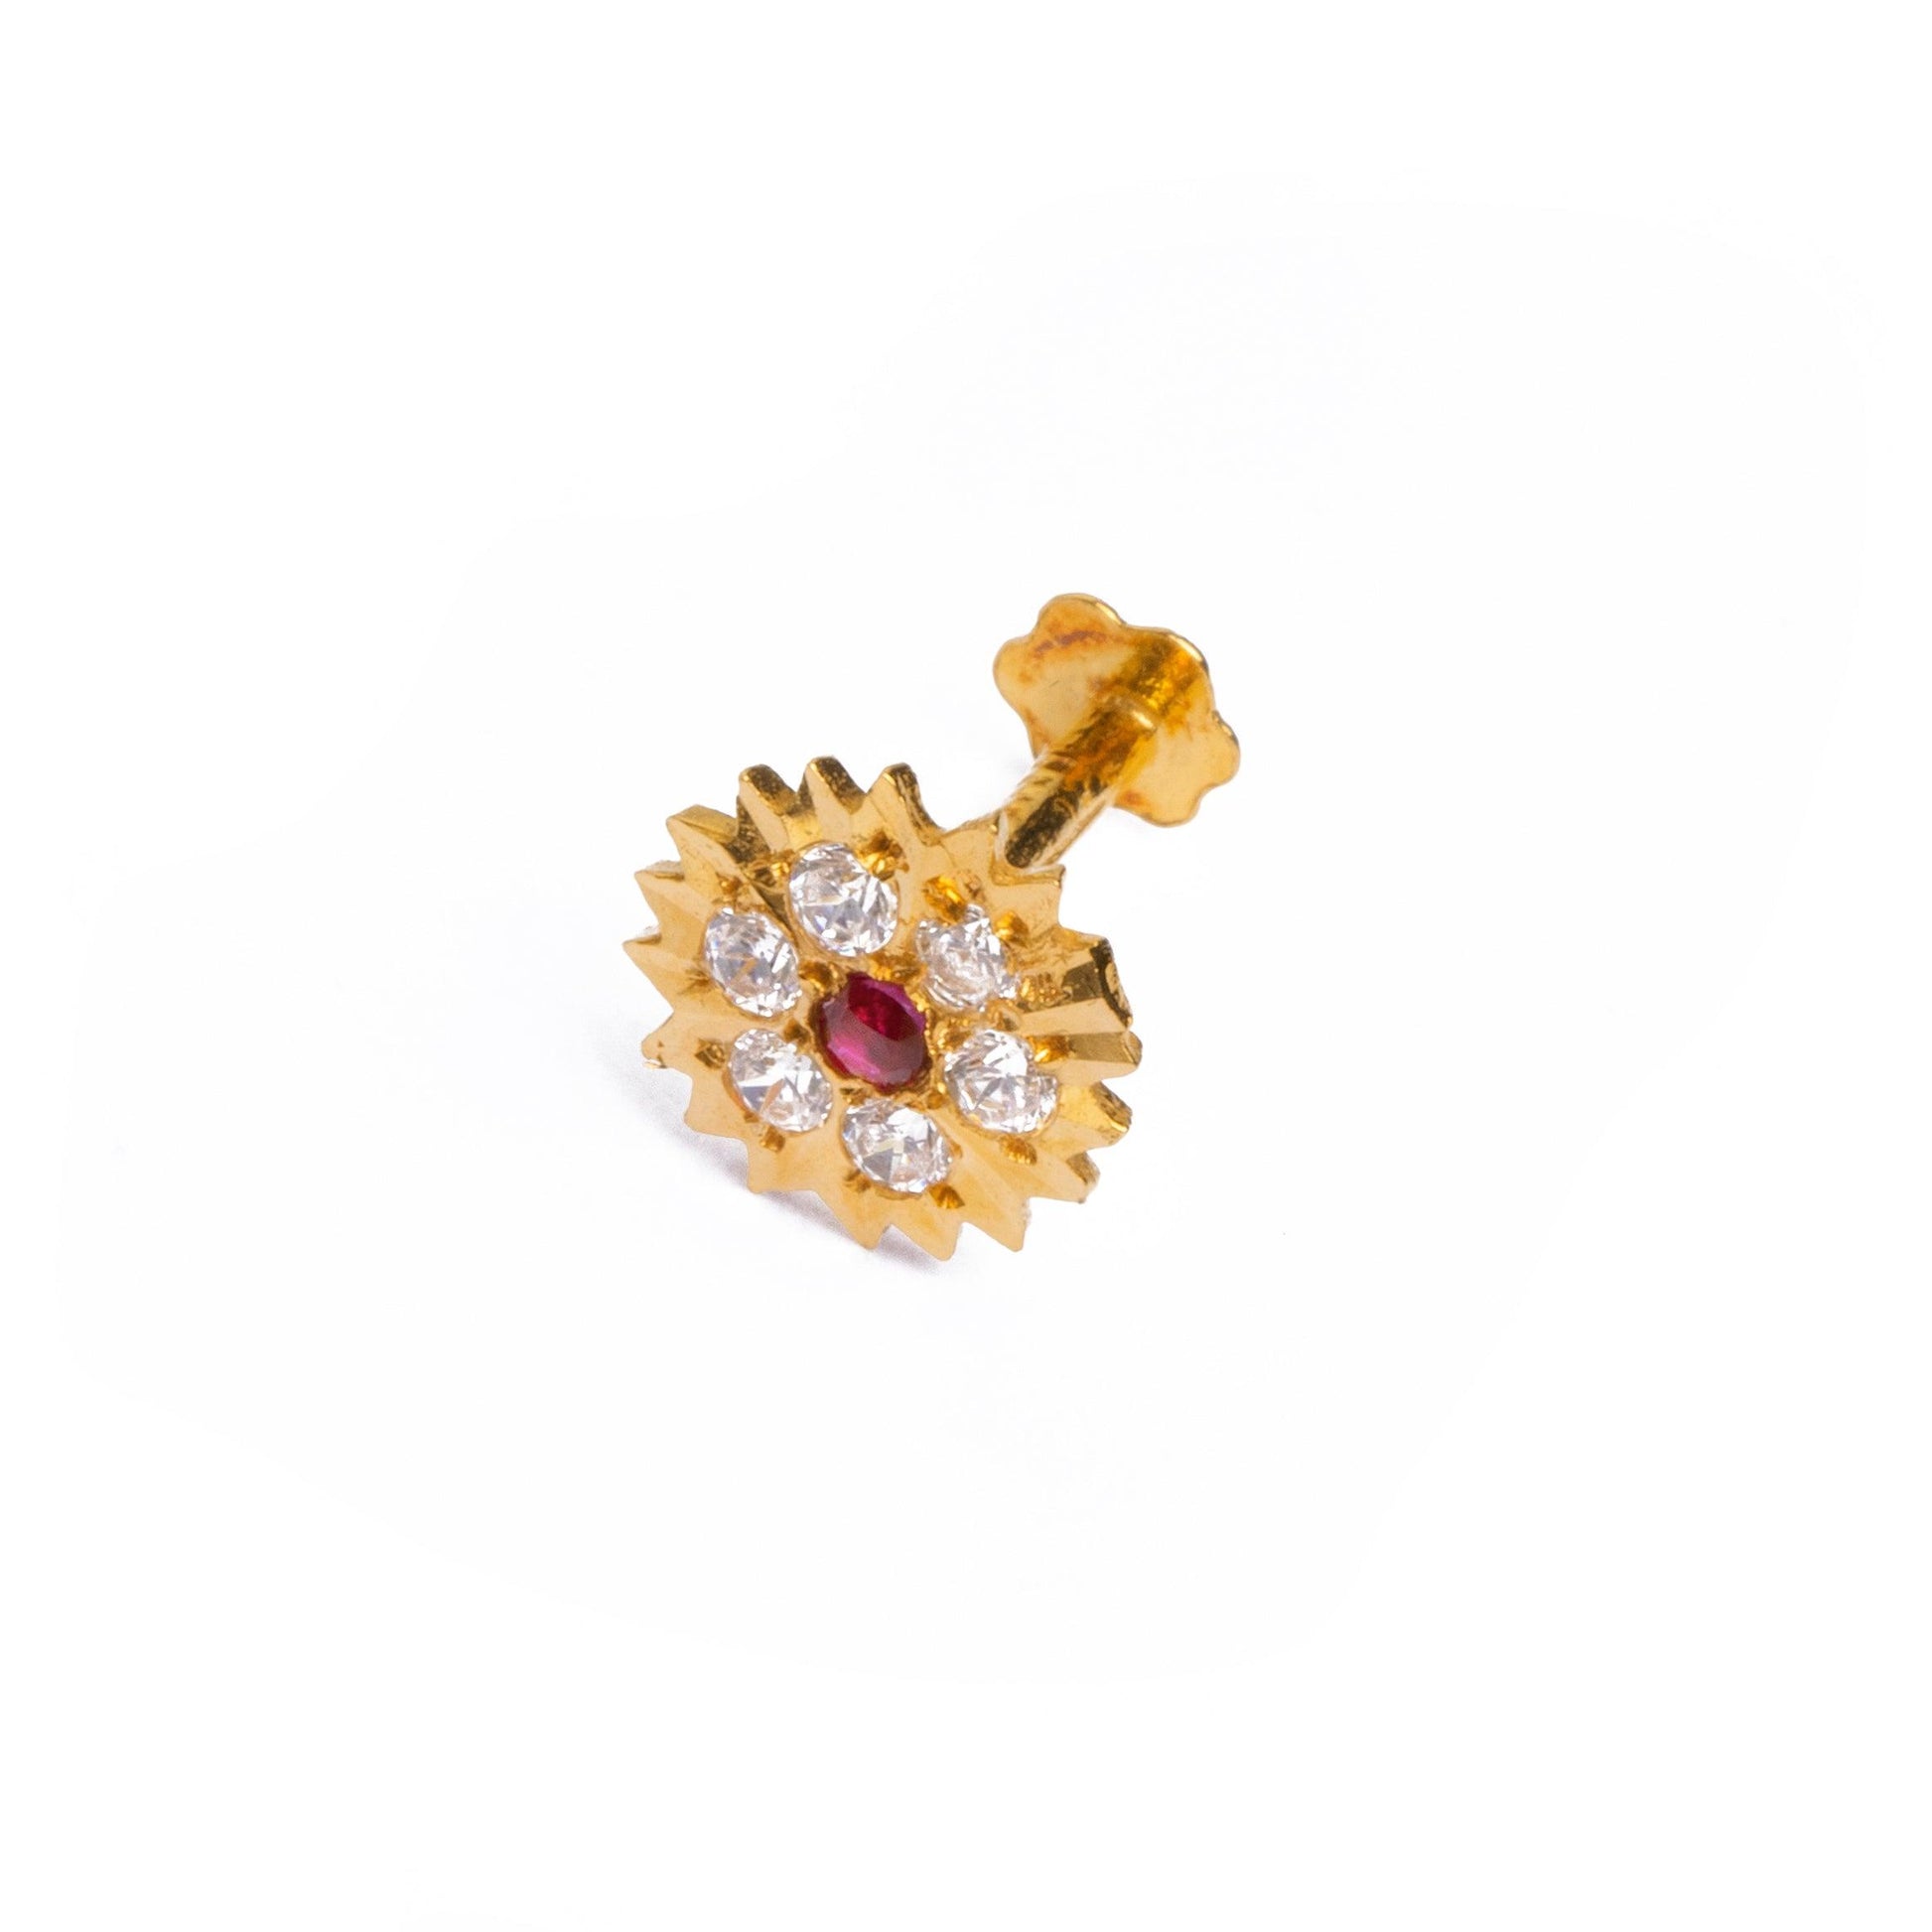 18ct Yellow Gold Screw Back Nose Stud set with Pink and White Cubic Zirconias NIP-4-700 - Minar Jewellers